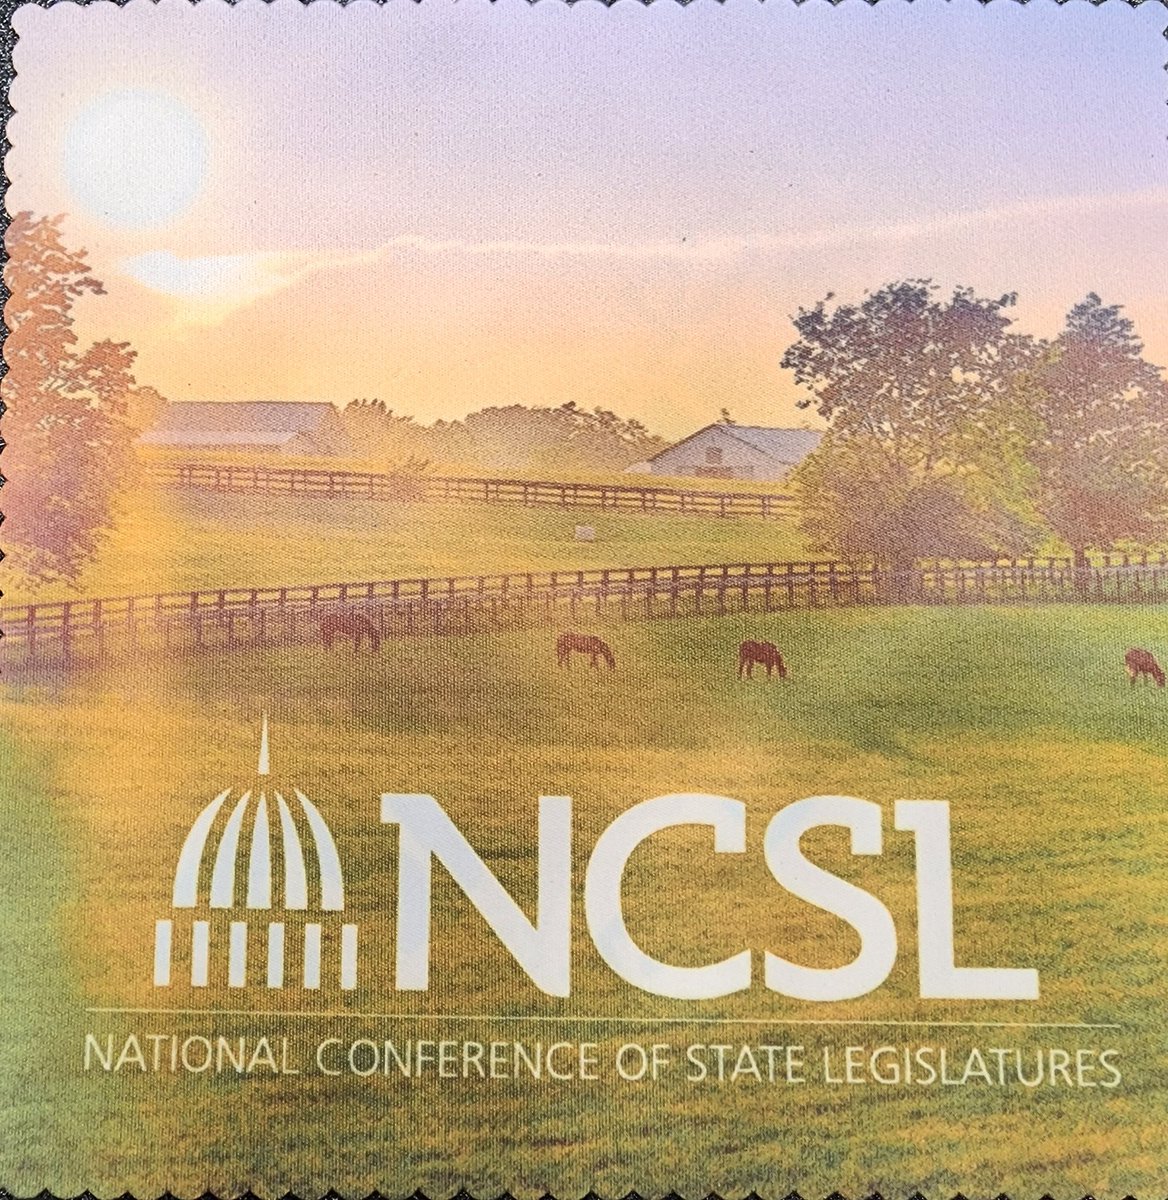 Great several days of learning and policy conversations at the National Conference of State Legislators 2023 Summit! #NCSL2023